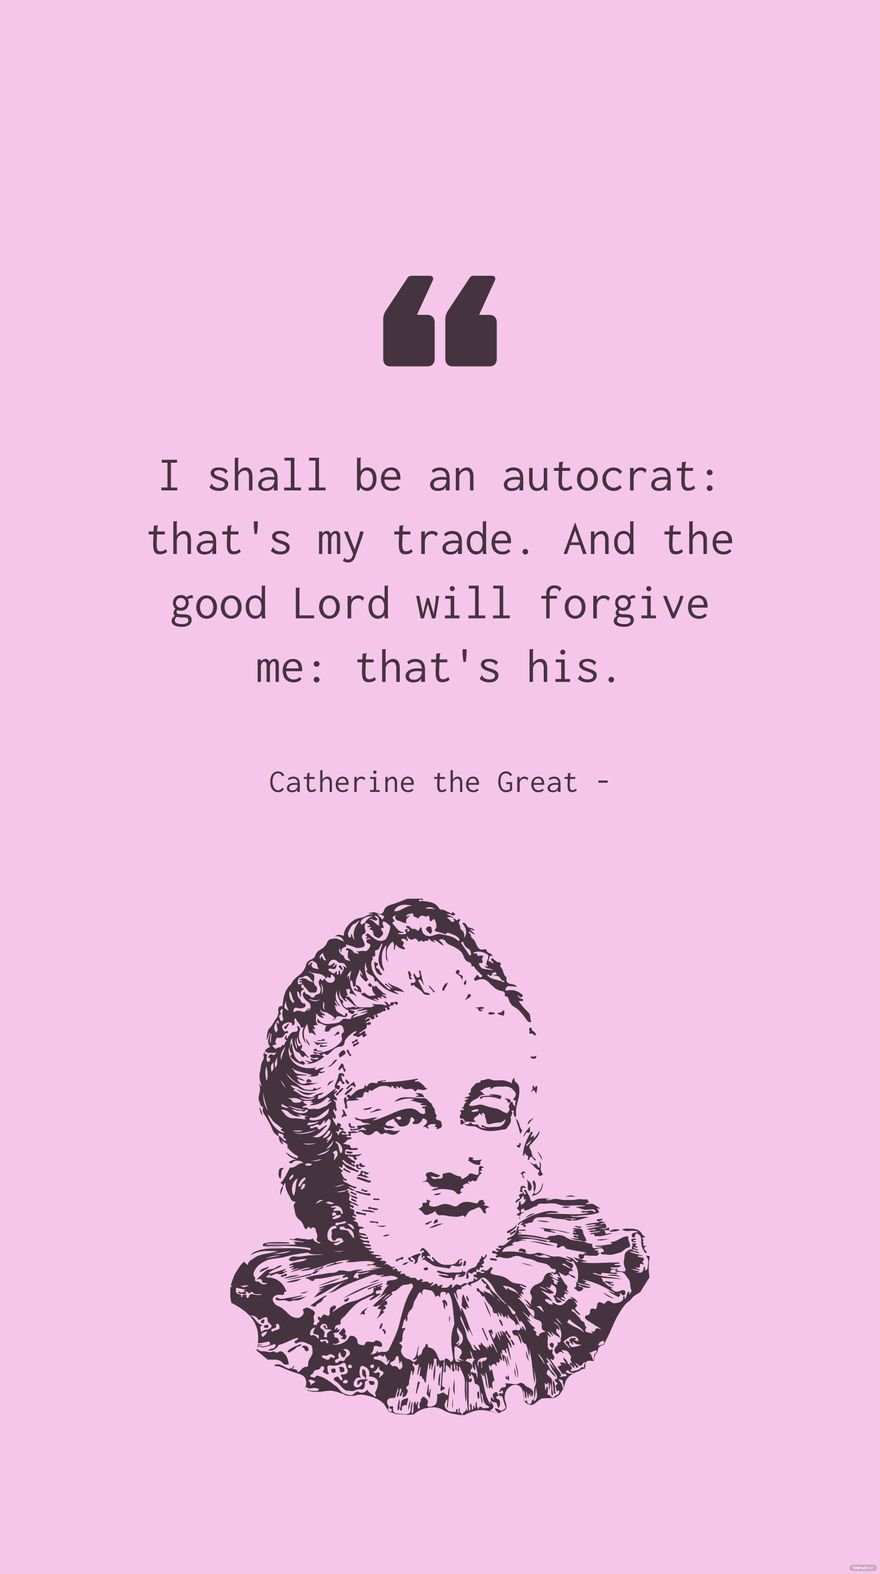 Free Catherine the Great - I shall be an autocrat: that's my trade. And the good Lord will forgive me: that's his. in JPG